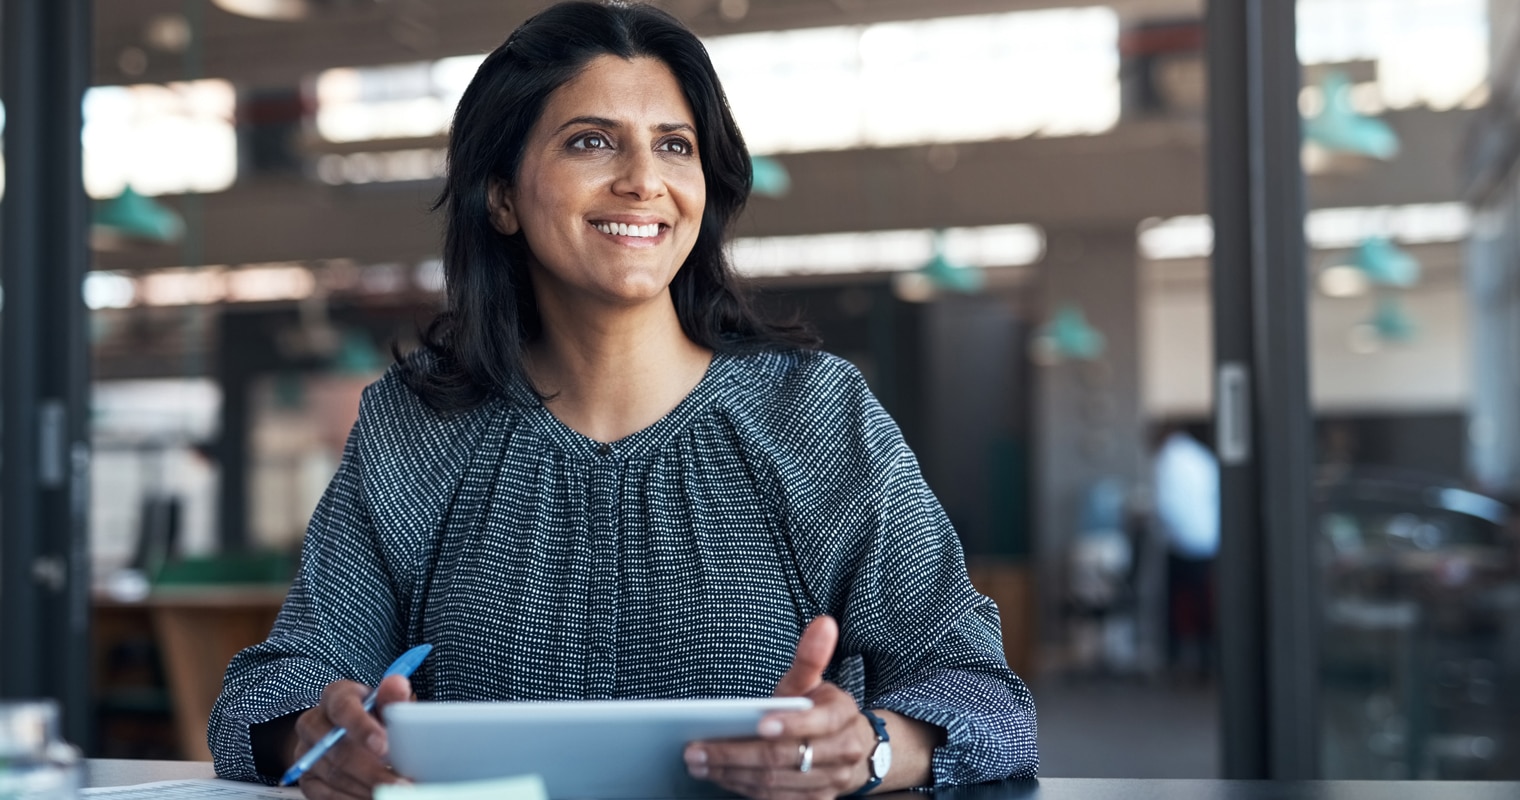 Smiling professional woman with a tablet, possibly studying machine learning modeling